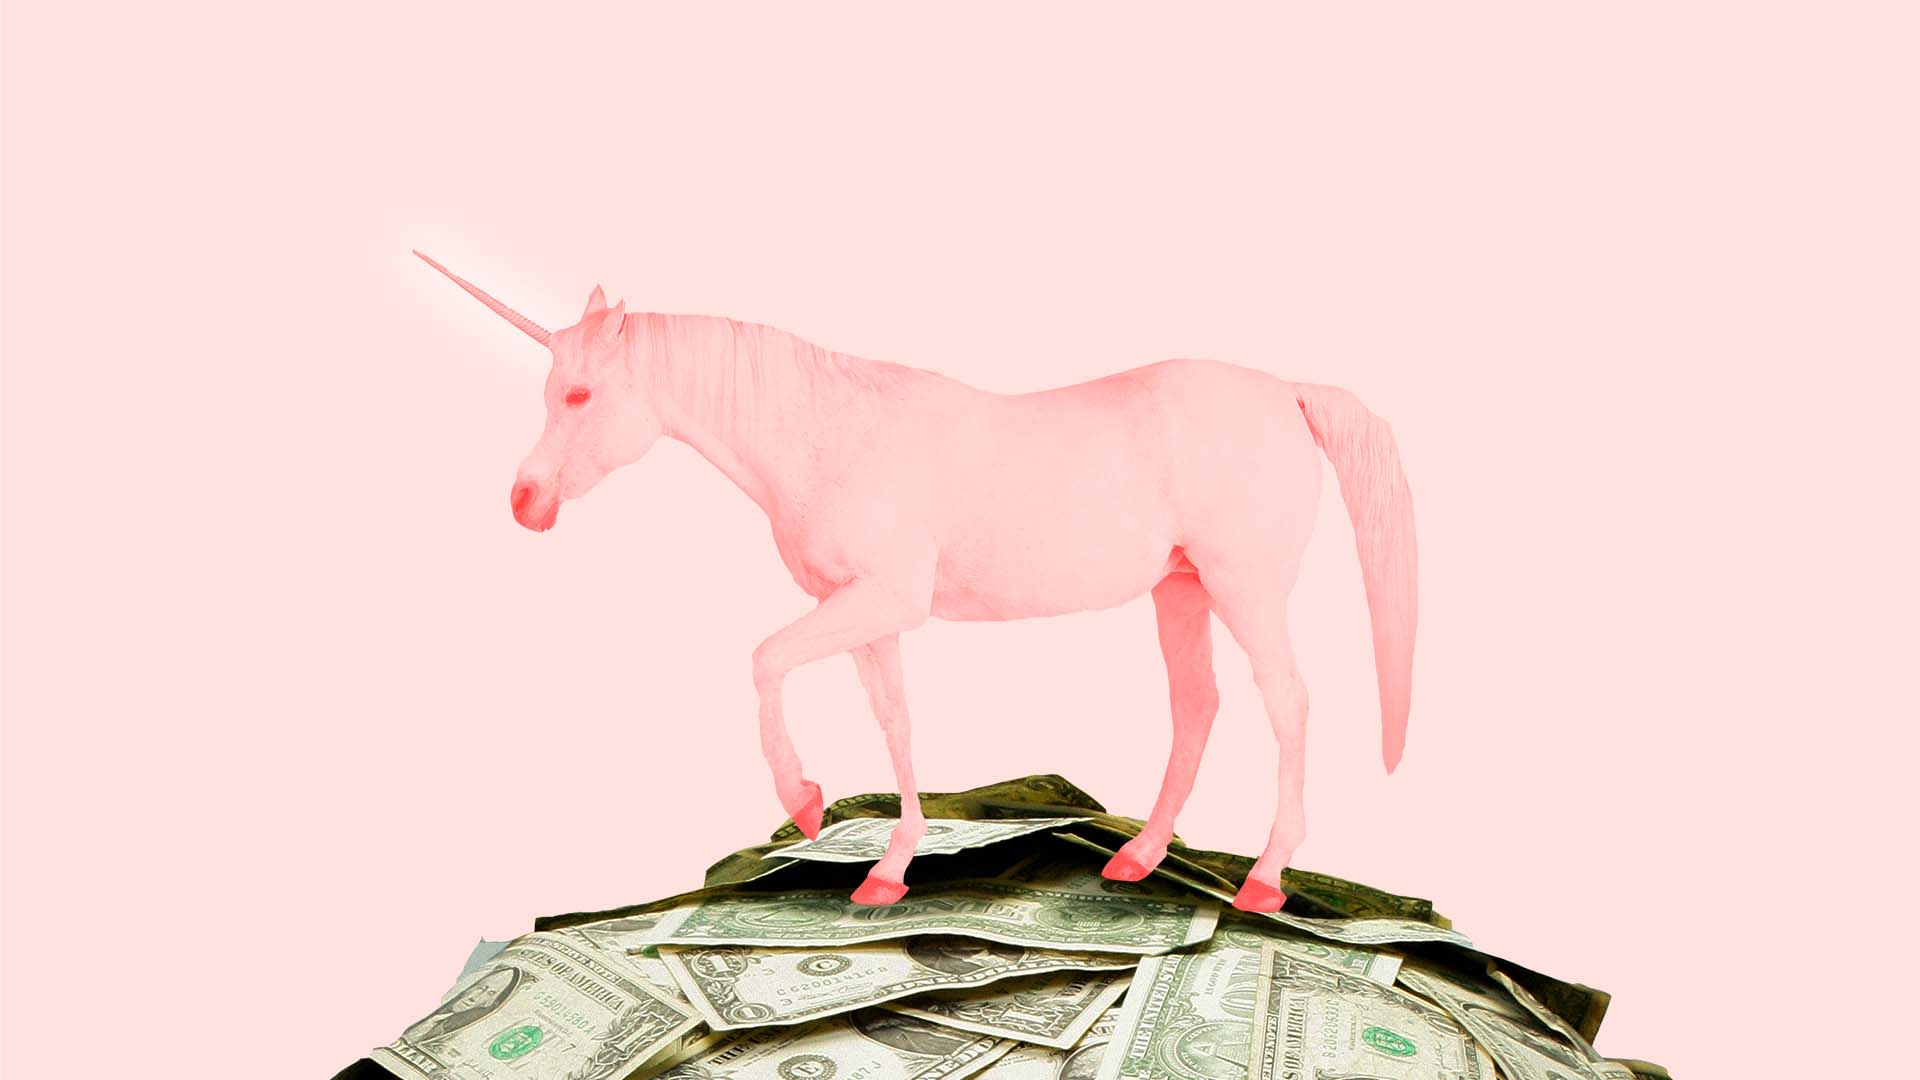 Report: 2021 Spawned More Unicorns Than The Past Five Years Combined